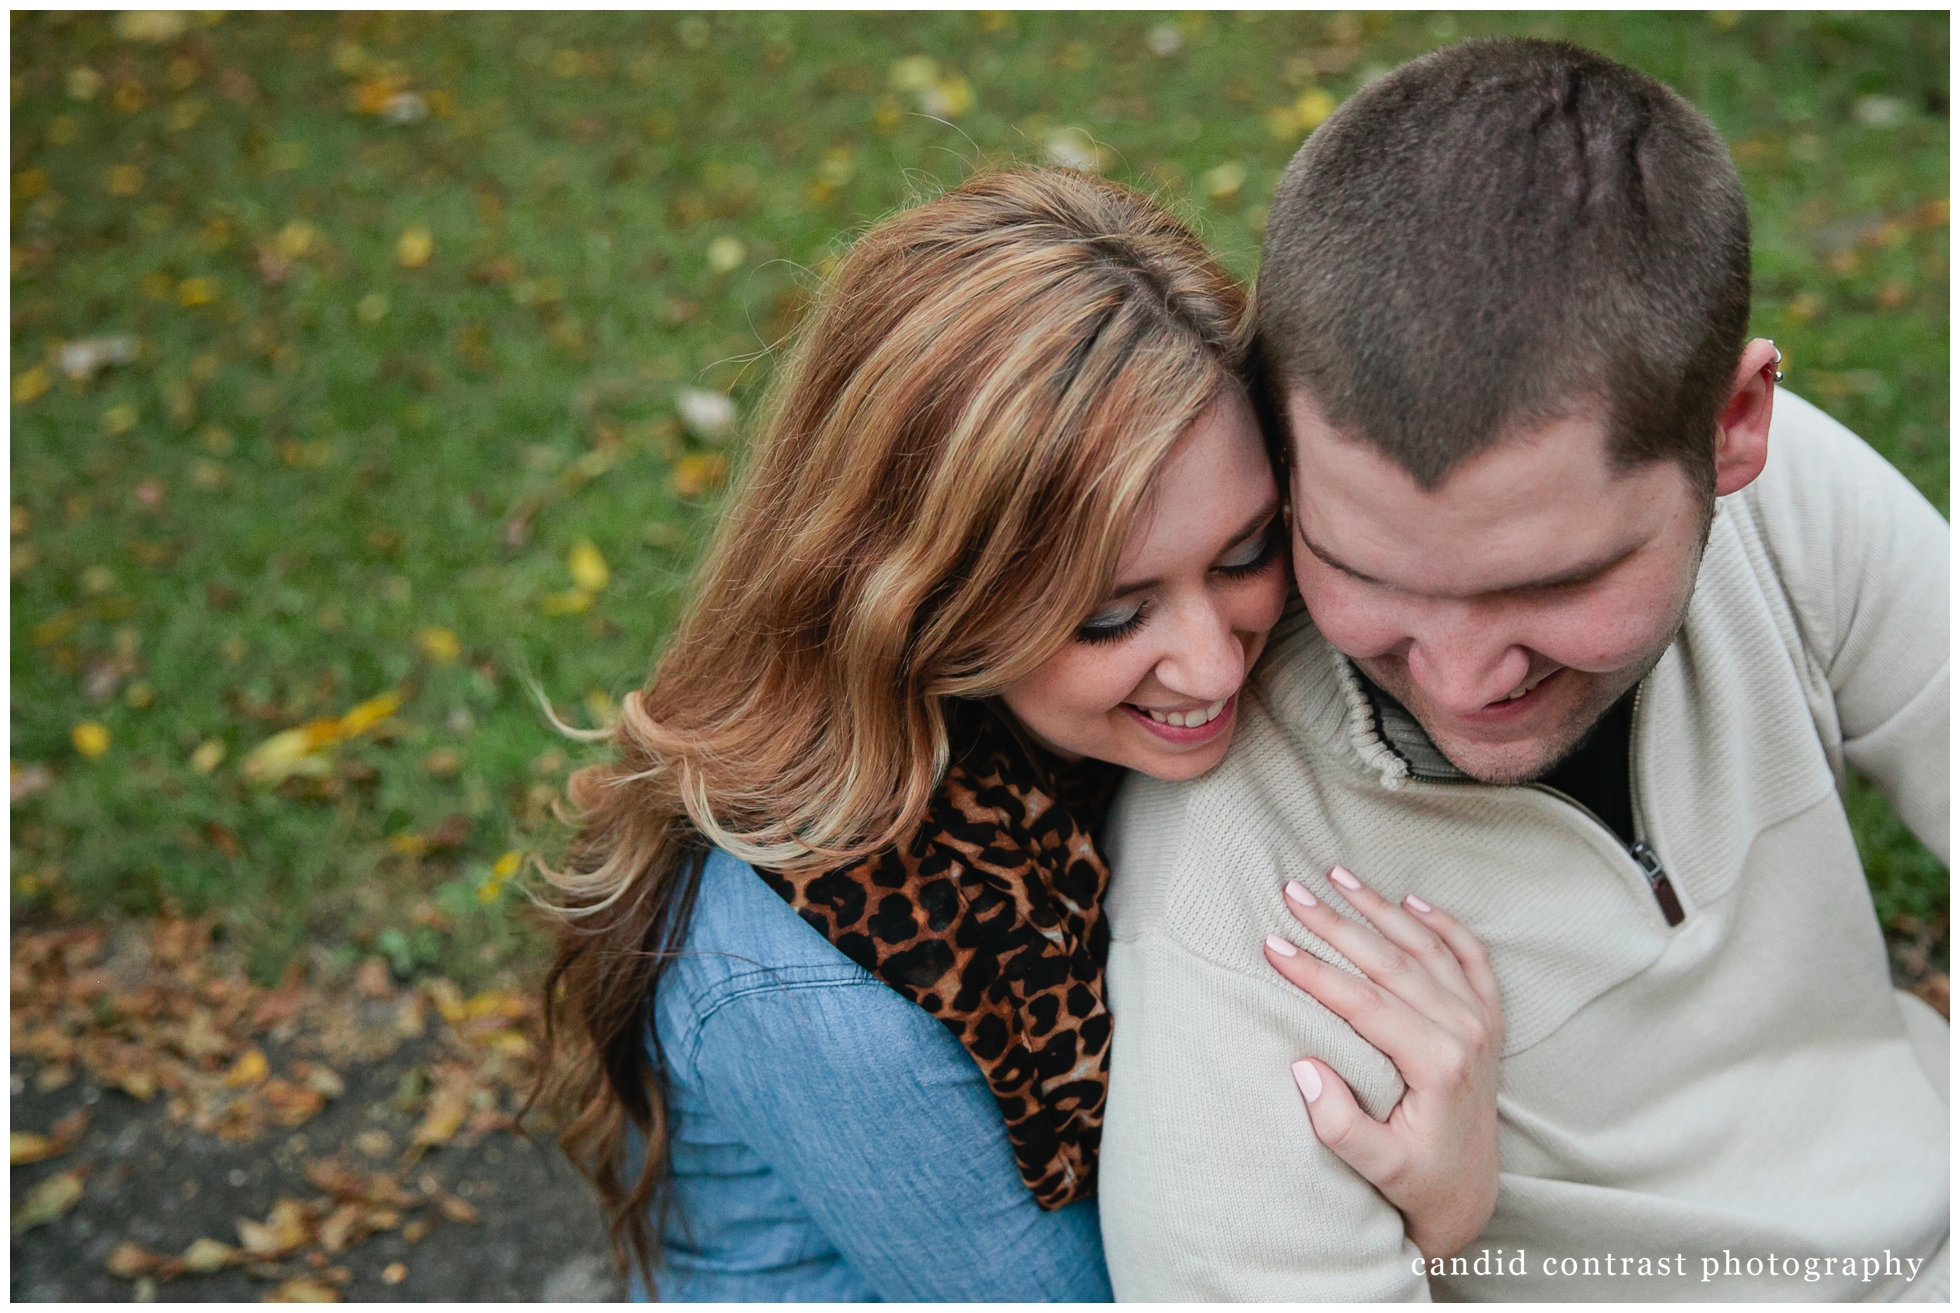 modern engagement photos in eagle point park in dubuque, ia, wedding photographer candid contrast photography